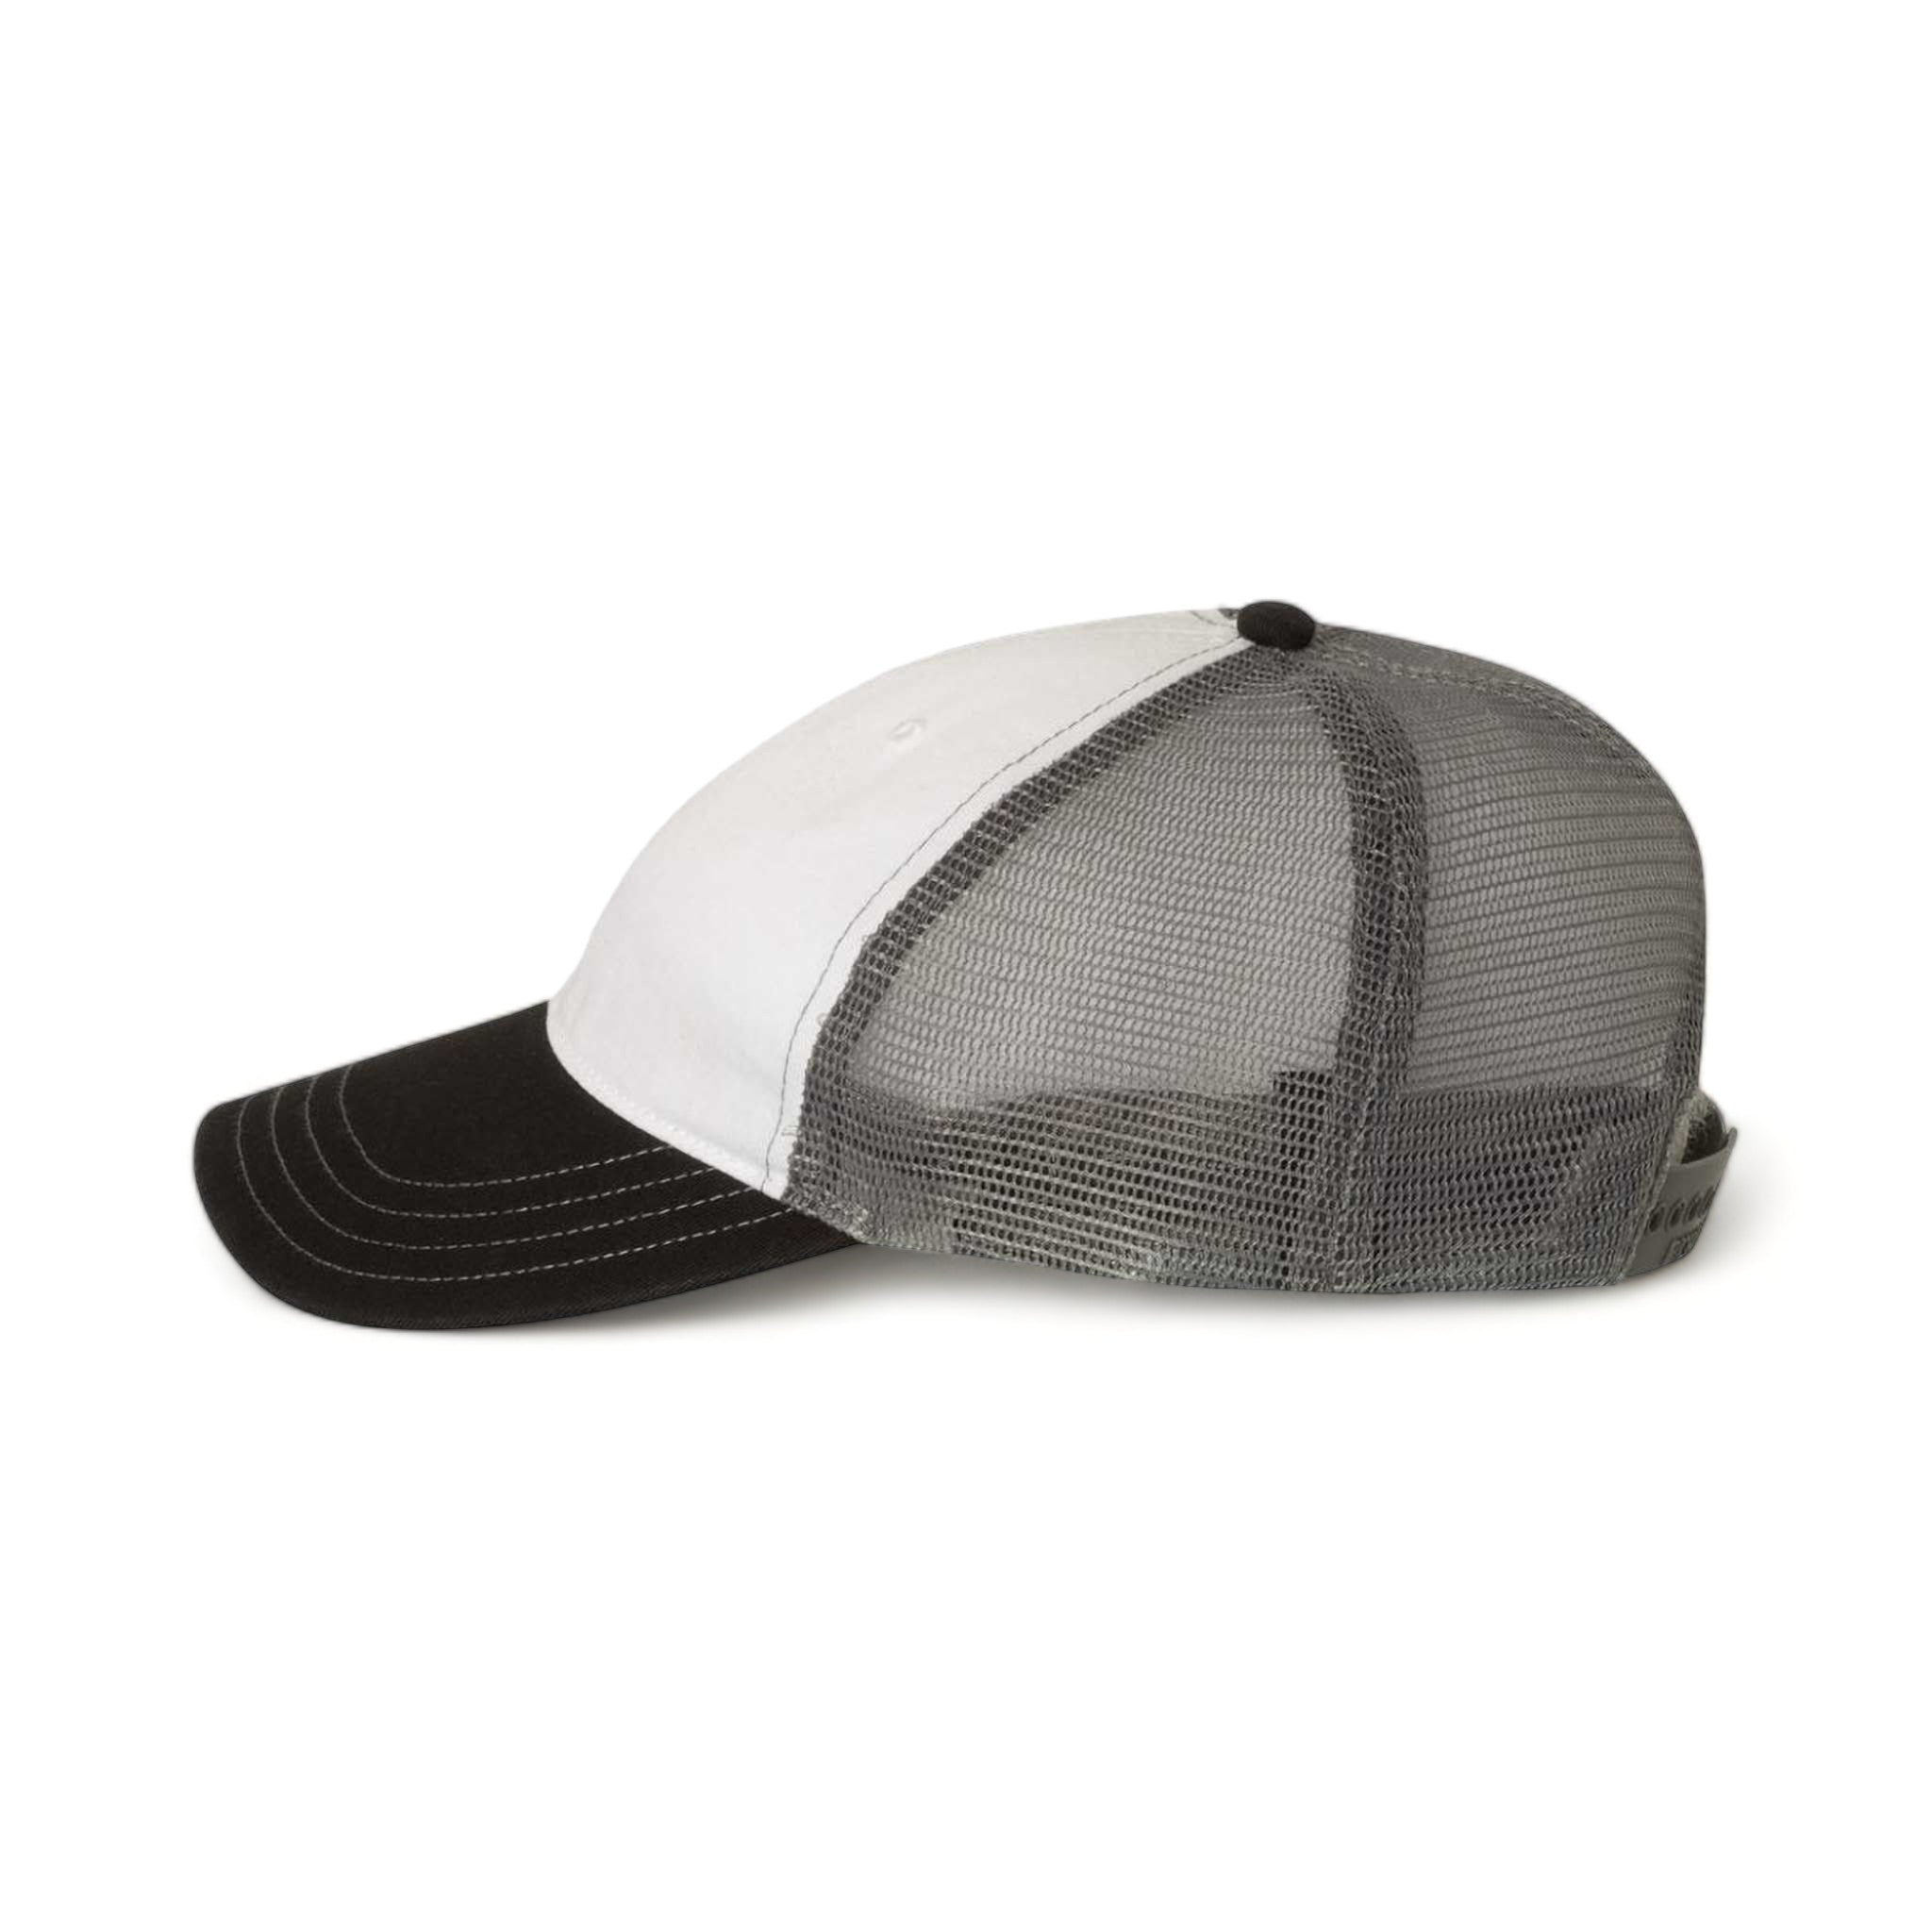 Side view of Richardson 111 custom hat in white, charcoal and black